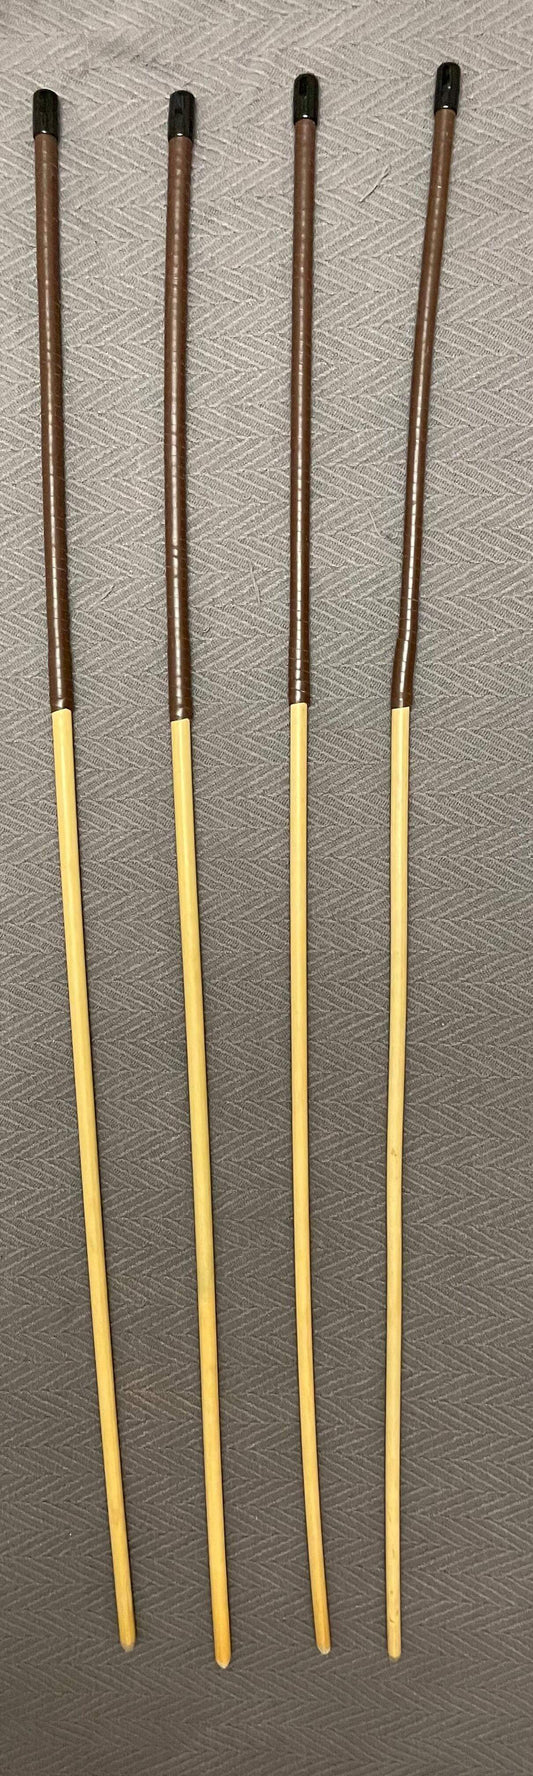 No Knot / Knotless / Ultimate Dragon Canes Set of 4 - 100 cms length - BRANDY Kangaroo Leather Handles - Stripewell Canes